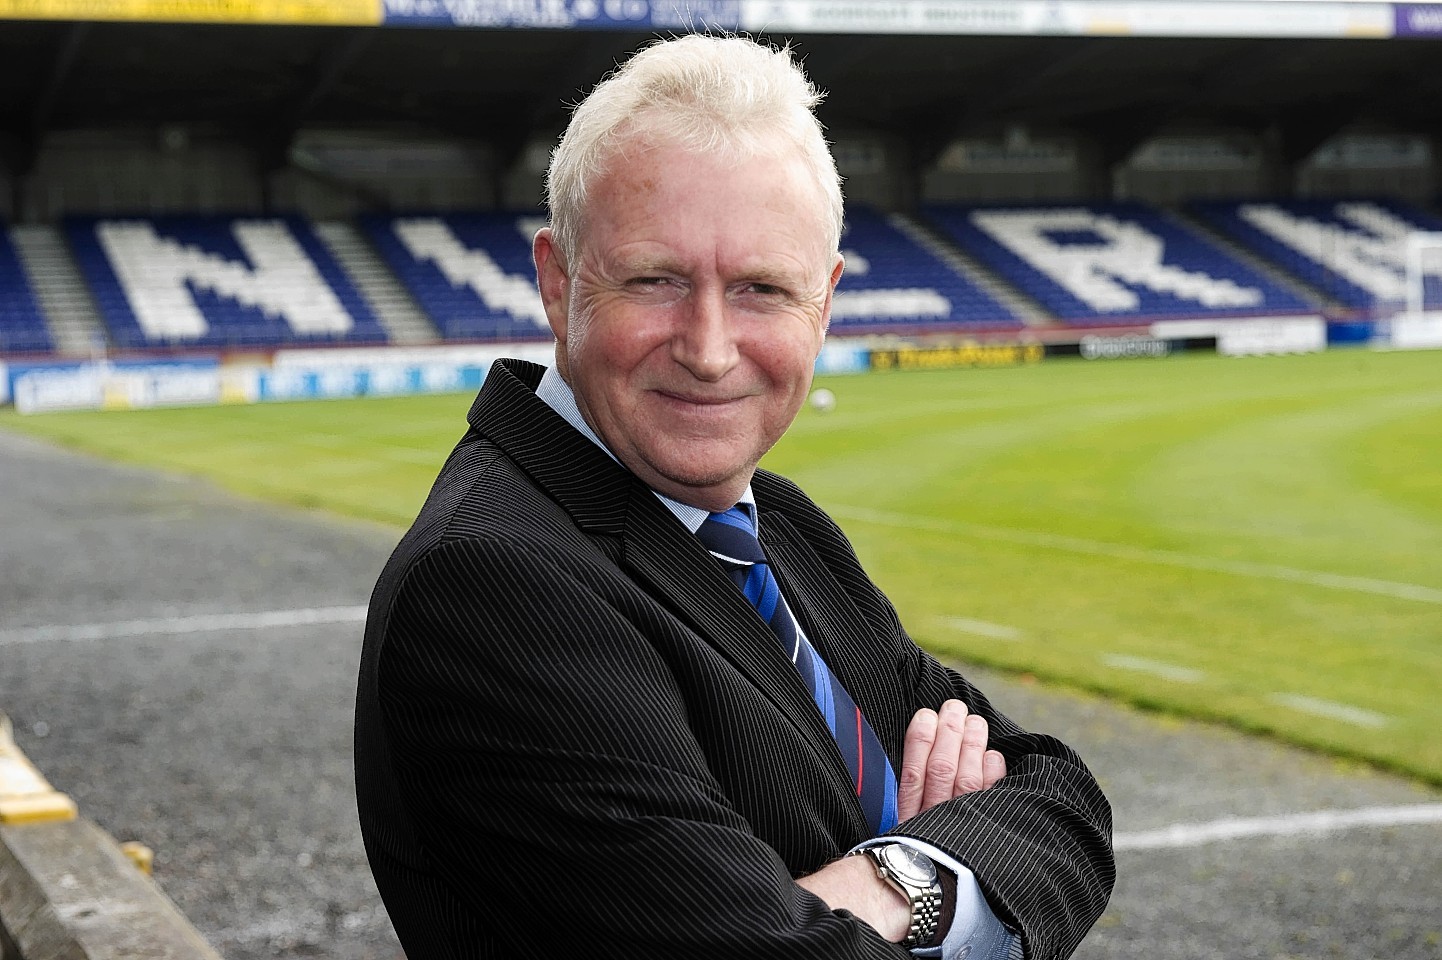 Caley Thistle chairman Kenny Cameron